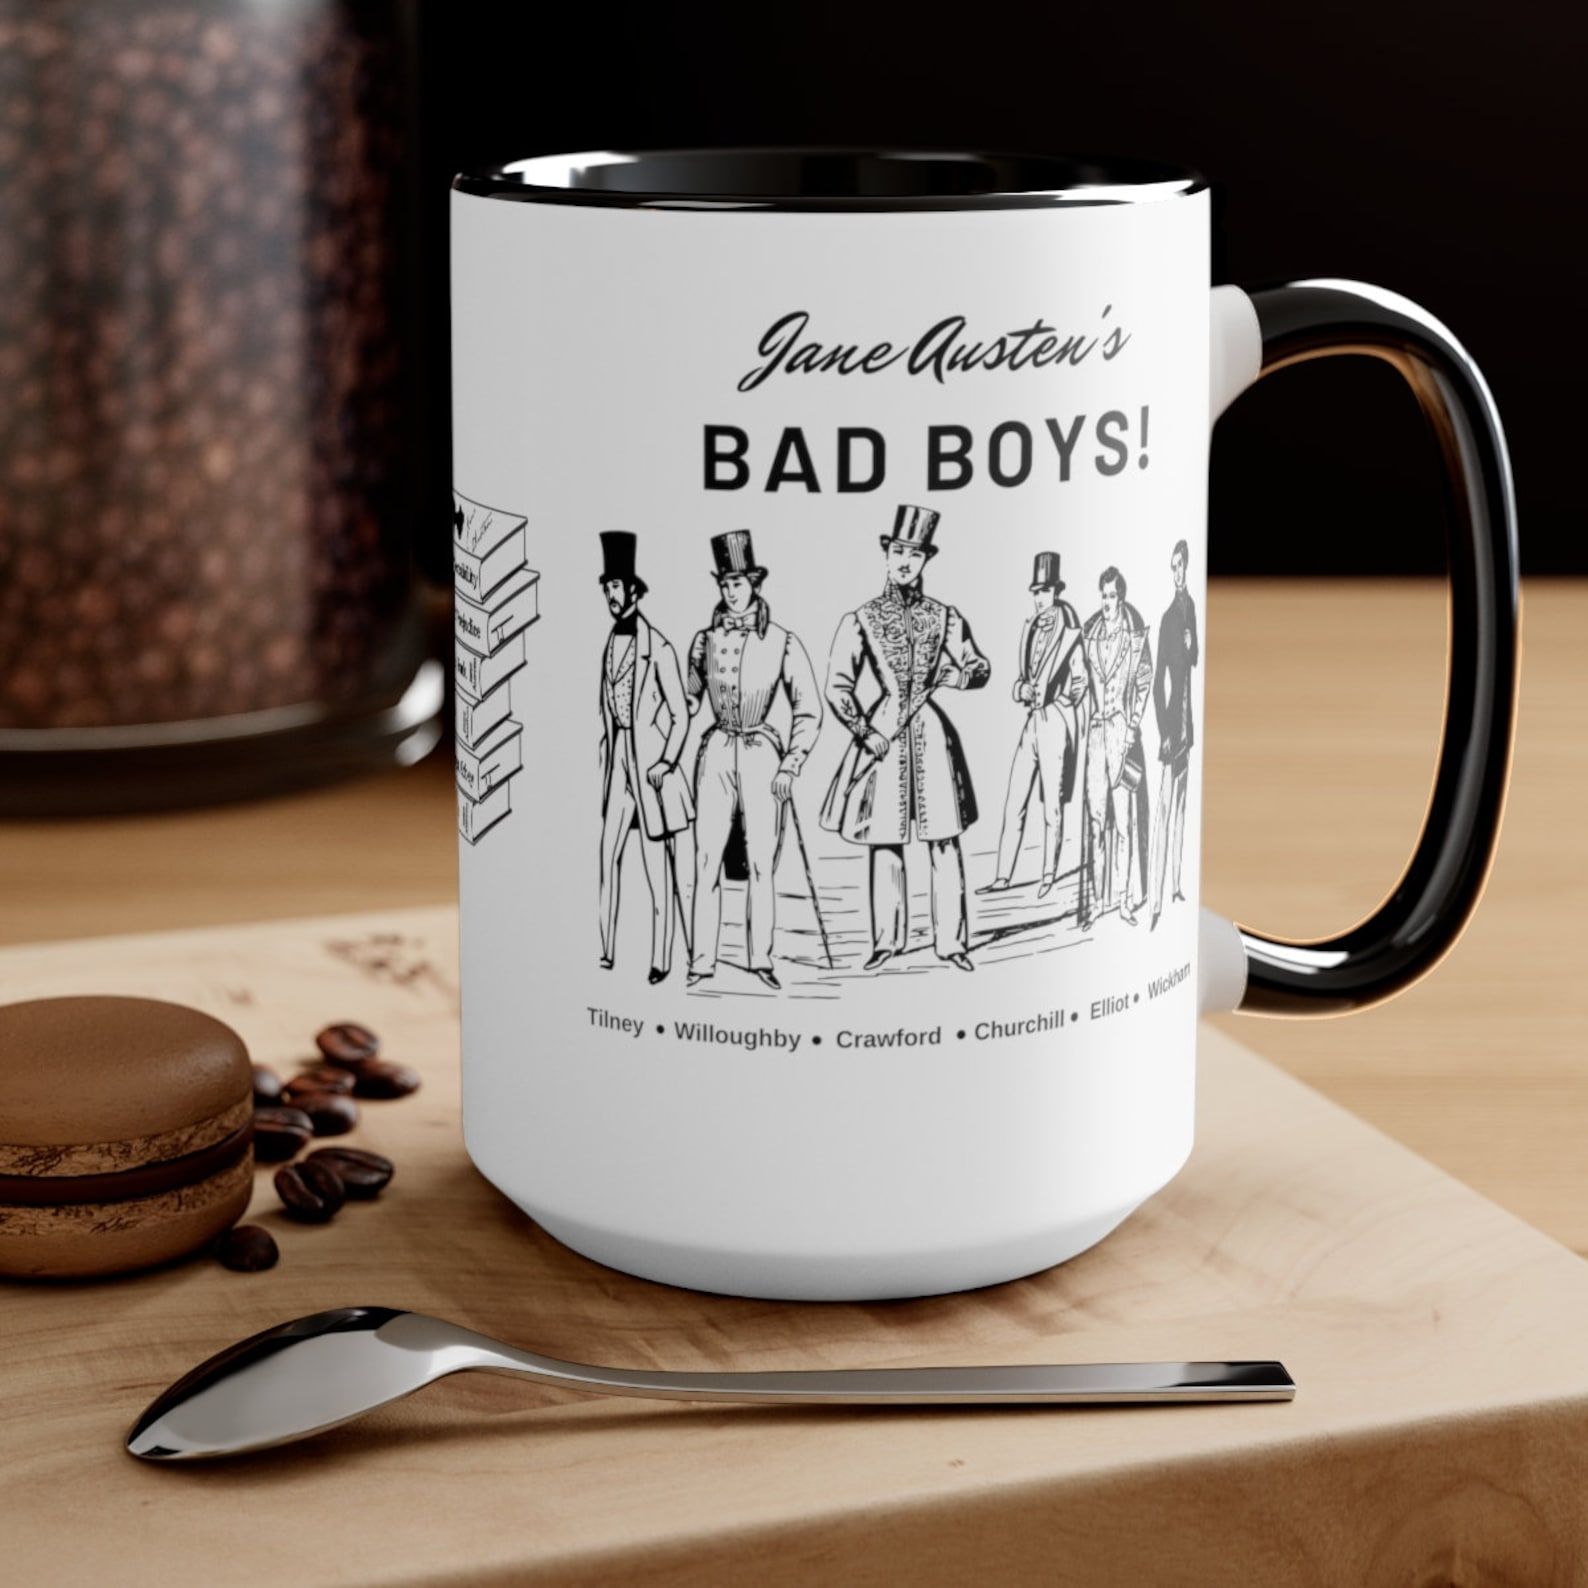 a black and white mug with an illustration of all the "bad boys" of Austen's novels